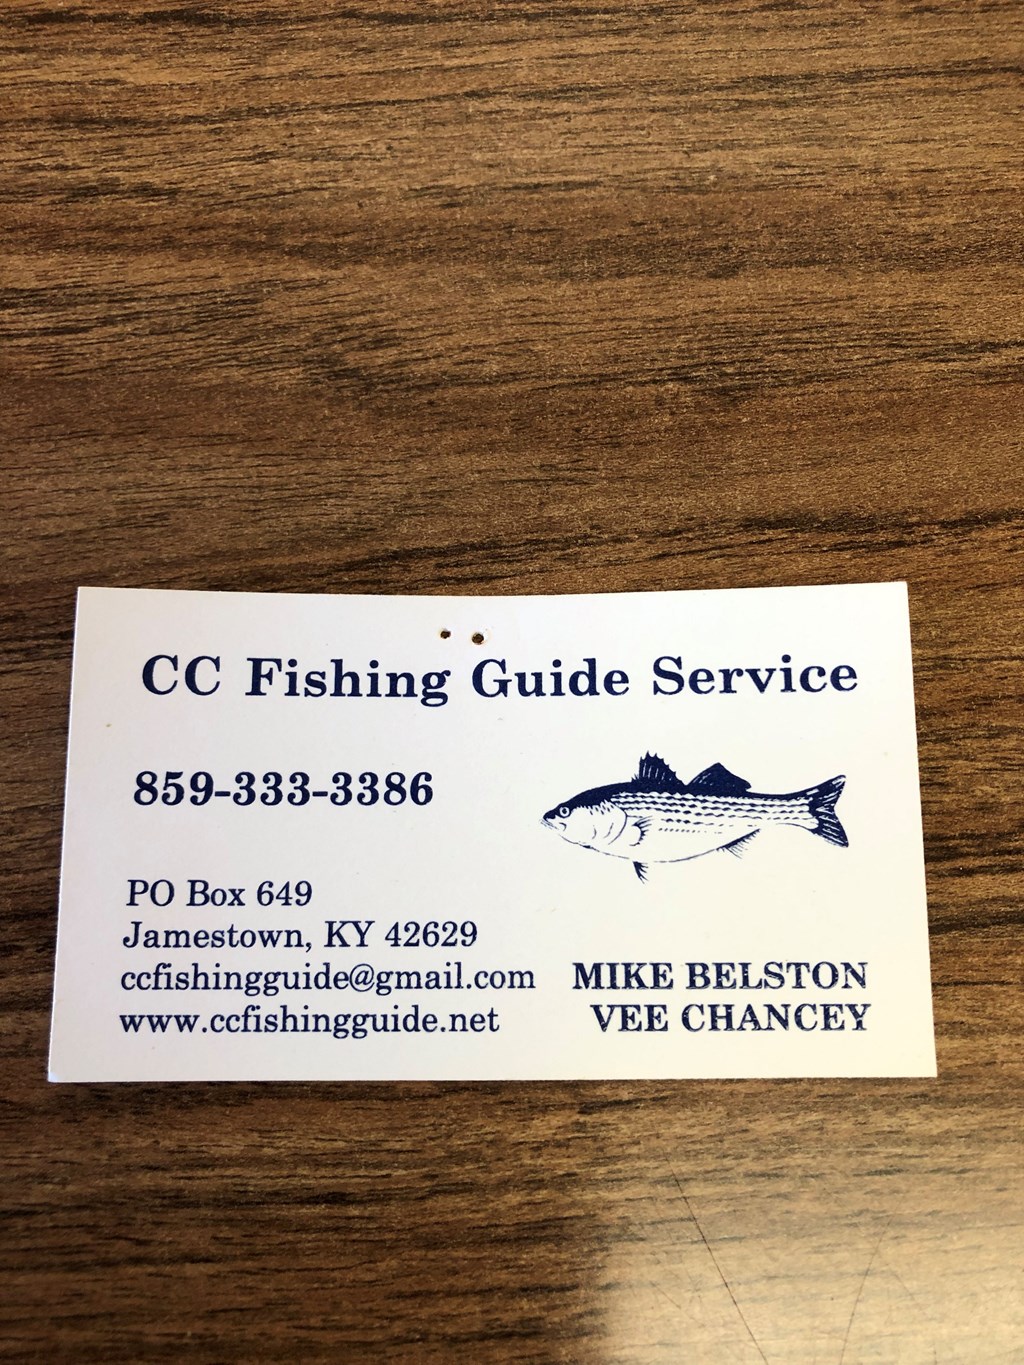 FISHING GUIDE SERVICE